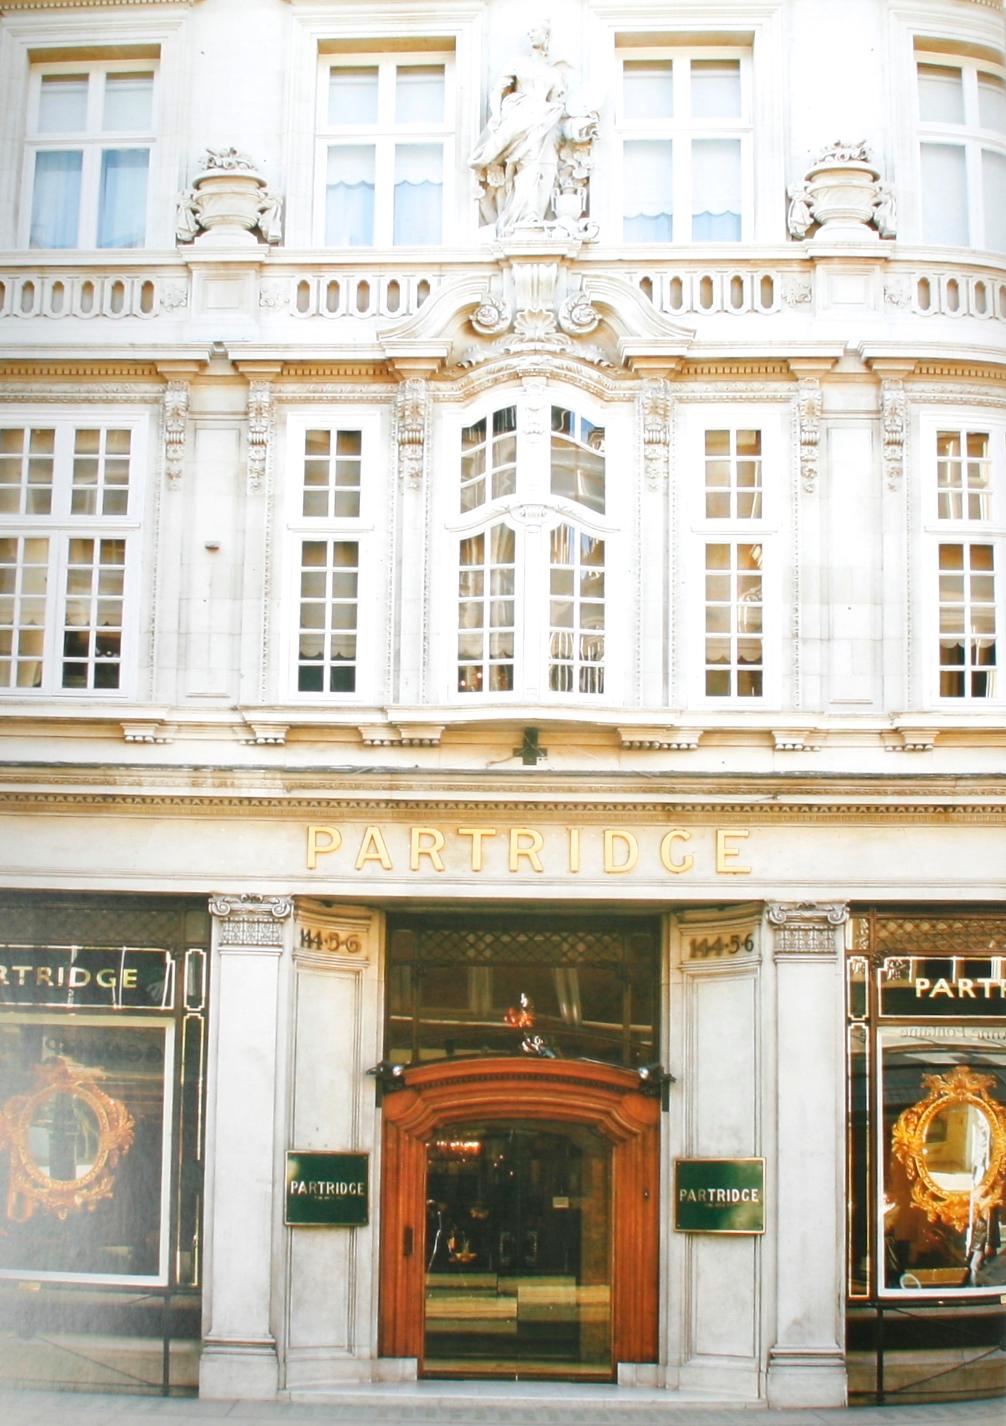 Partridge: Christie’s New York May 17, 2006. Partridge, a sale of select property from the renowned Partridge gallery in London, took place in New York. A leader in the field of 18th century English and French furniture, Partridge has helped to